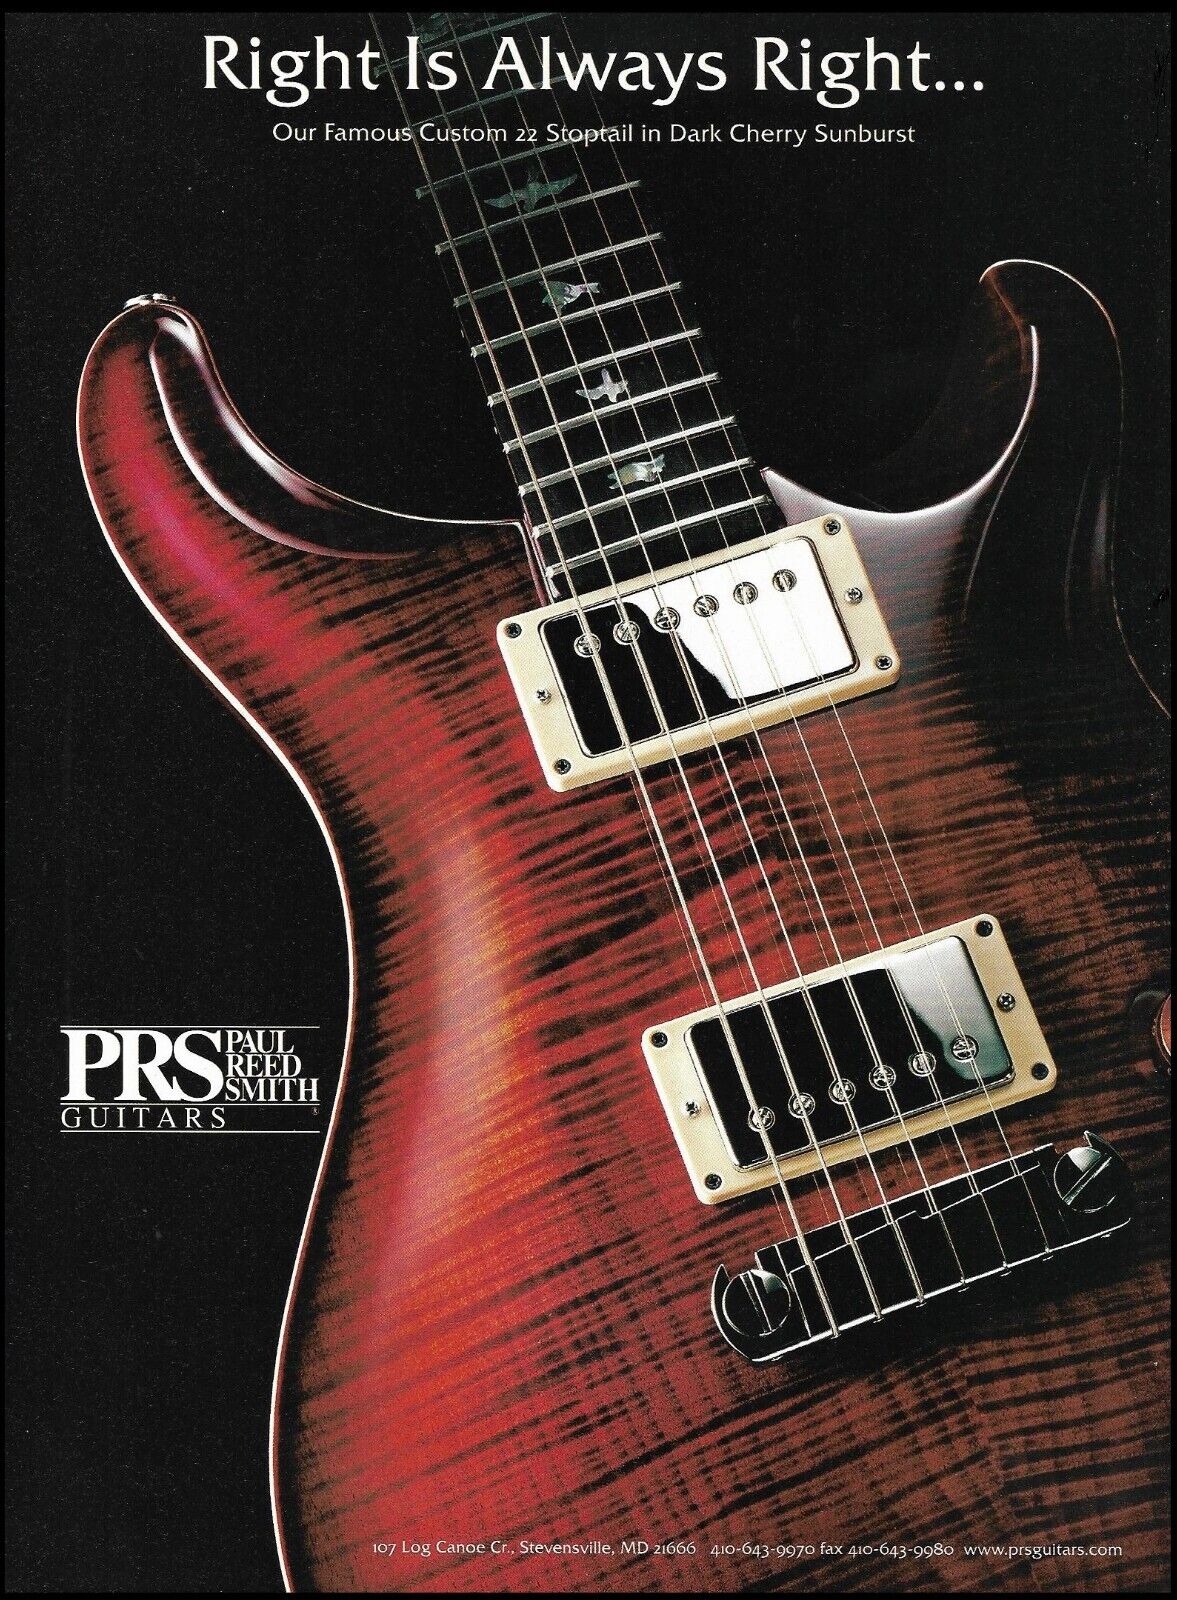 PRS Custom 22 Stoptail Right-Handed guitar advertisement 1999 ad print